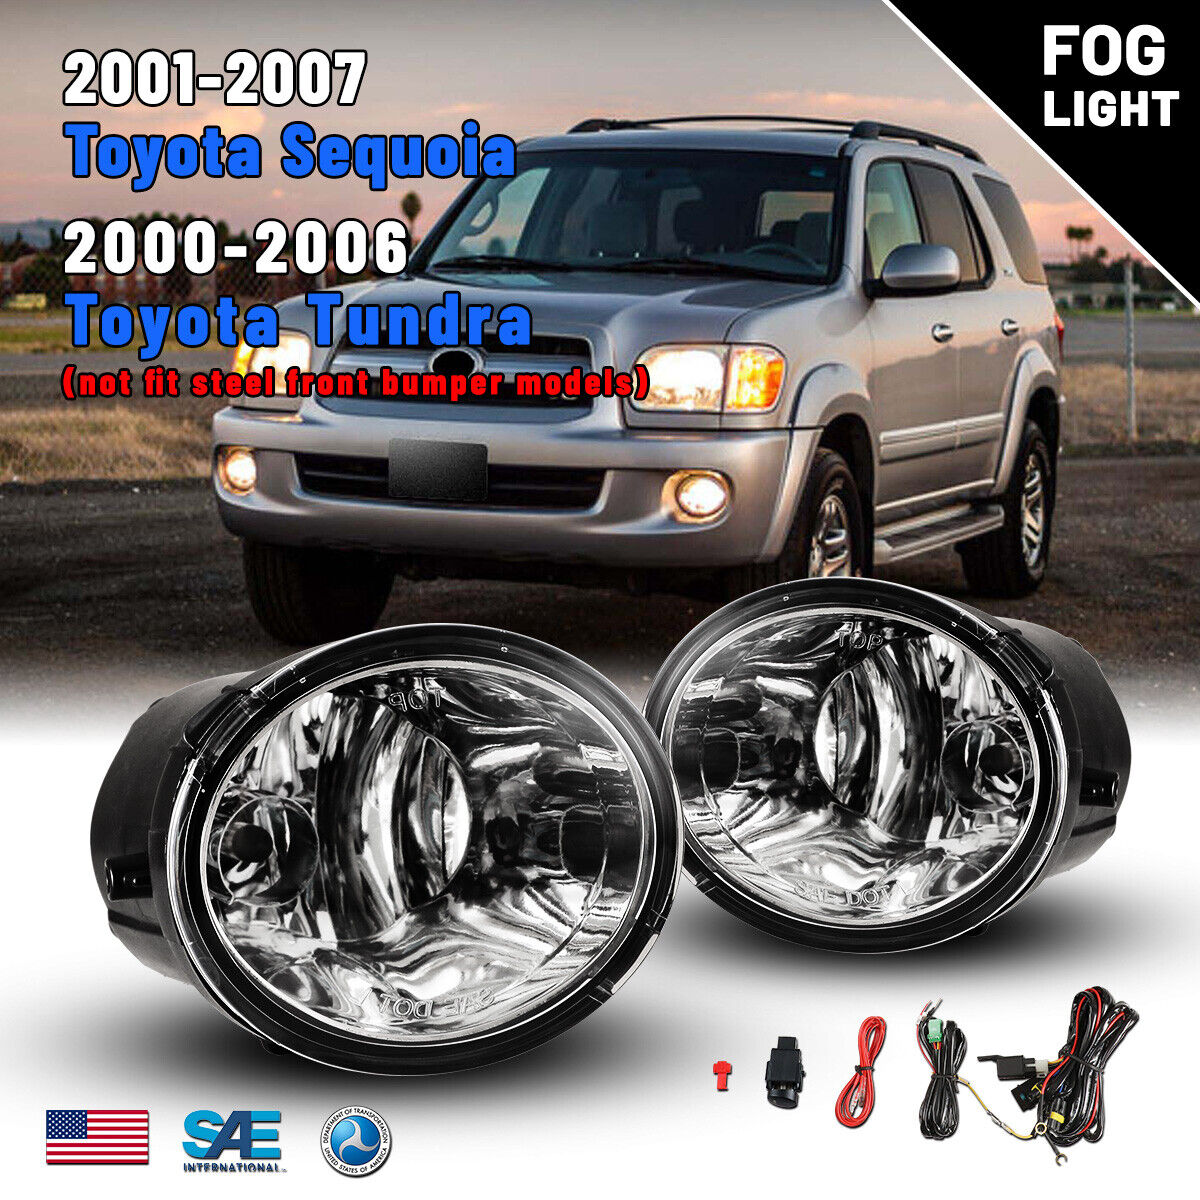 Fog Lights for 00-06 Toyota Tundra 01-07 Sequoia Assembly Lamp Wiring Kit Switch